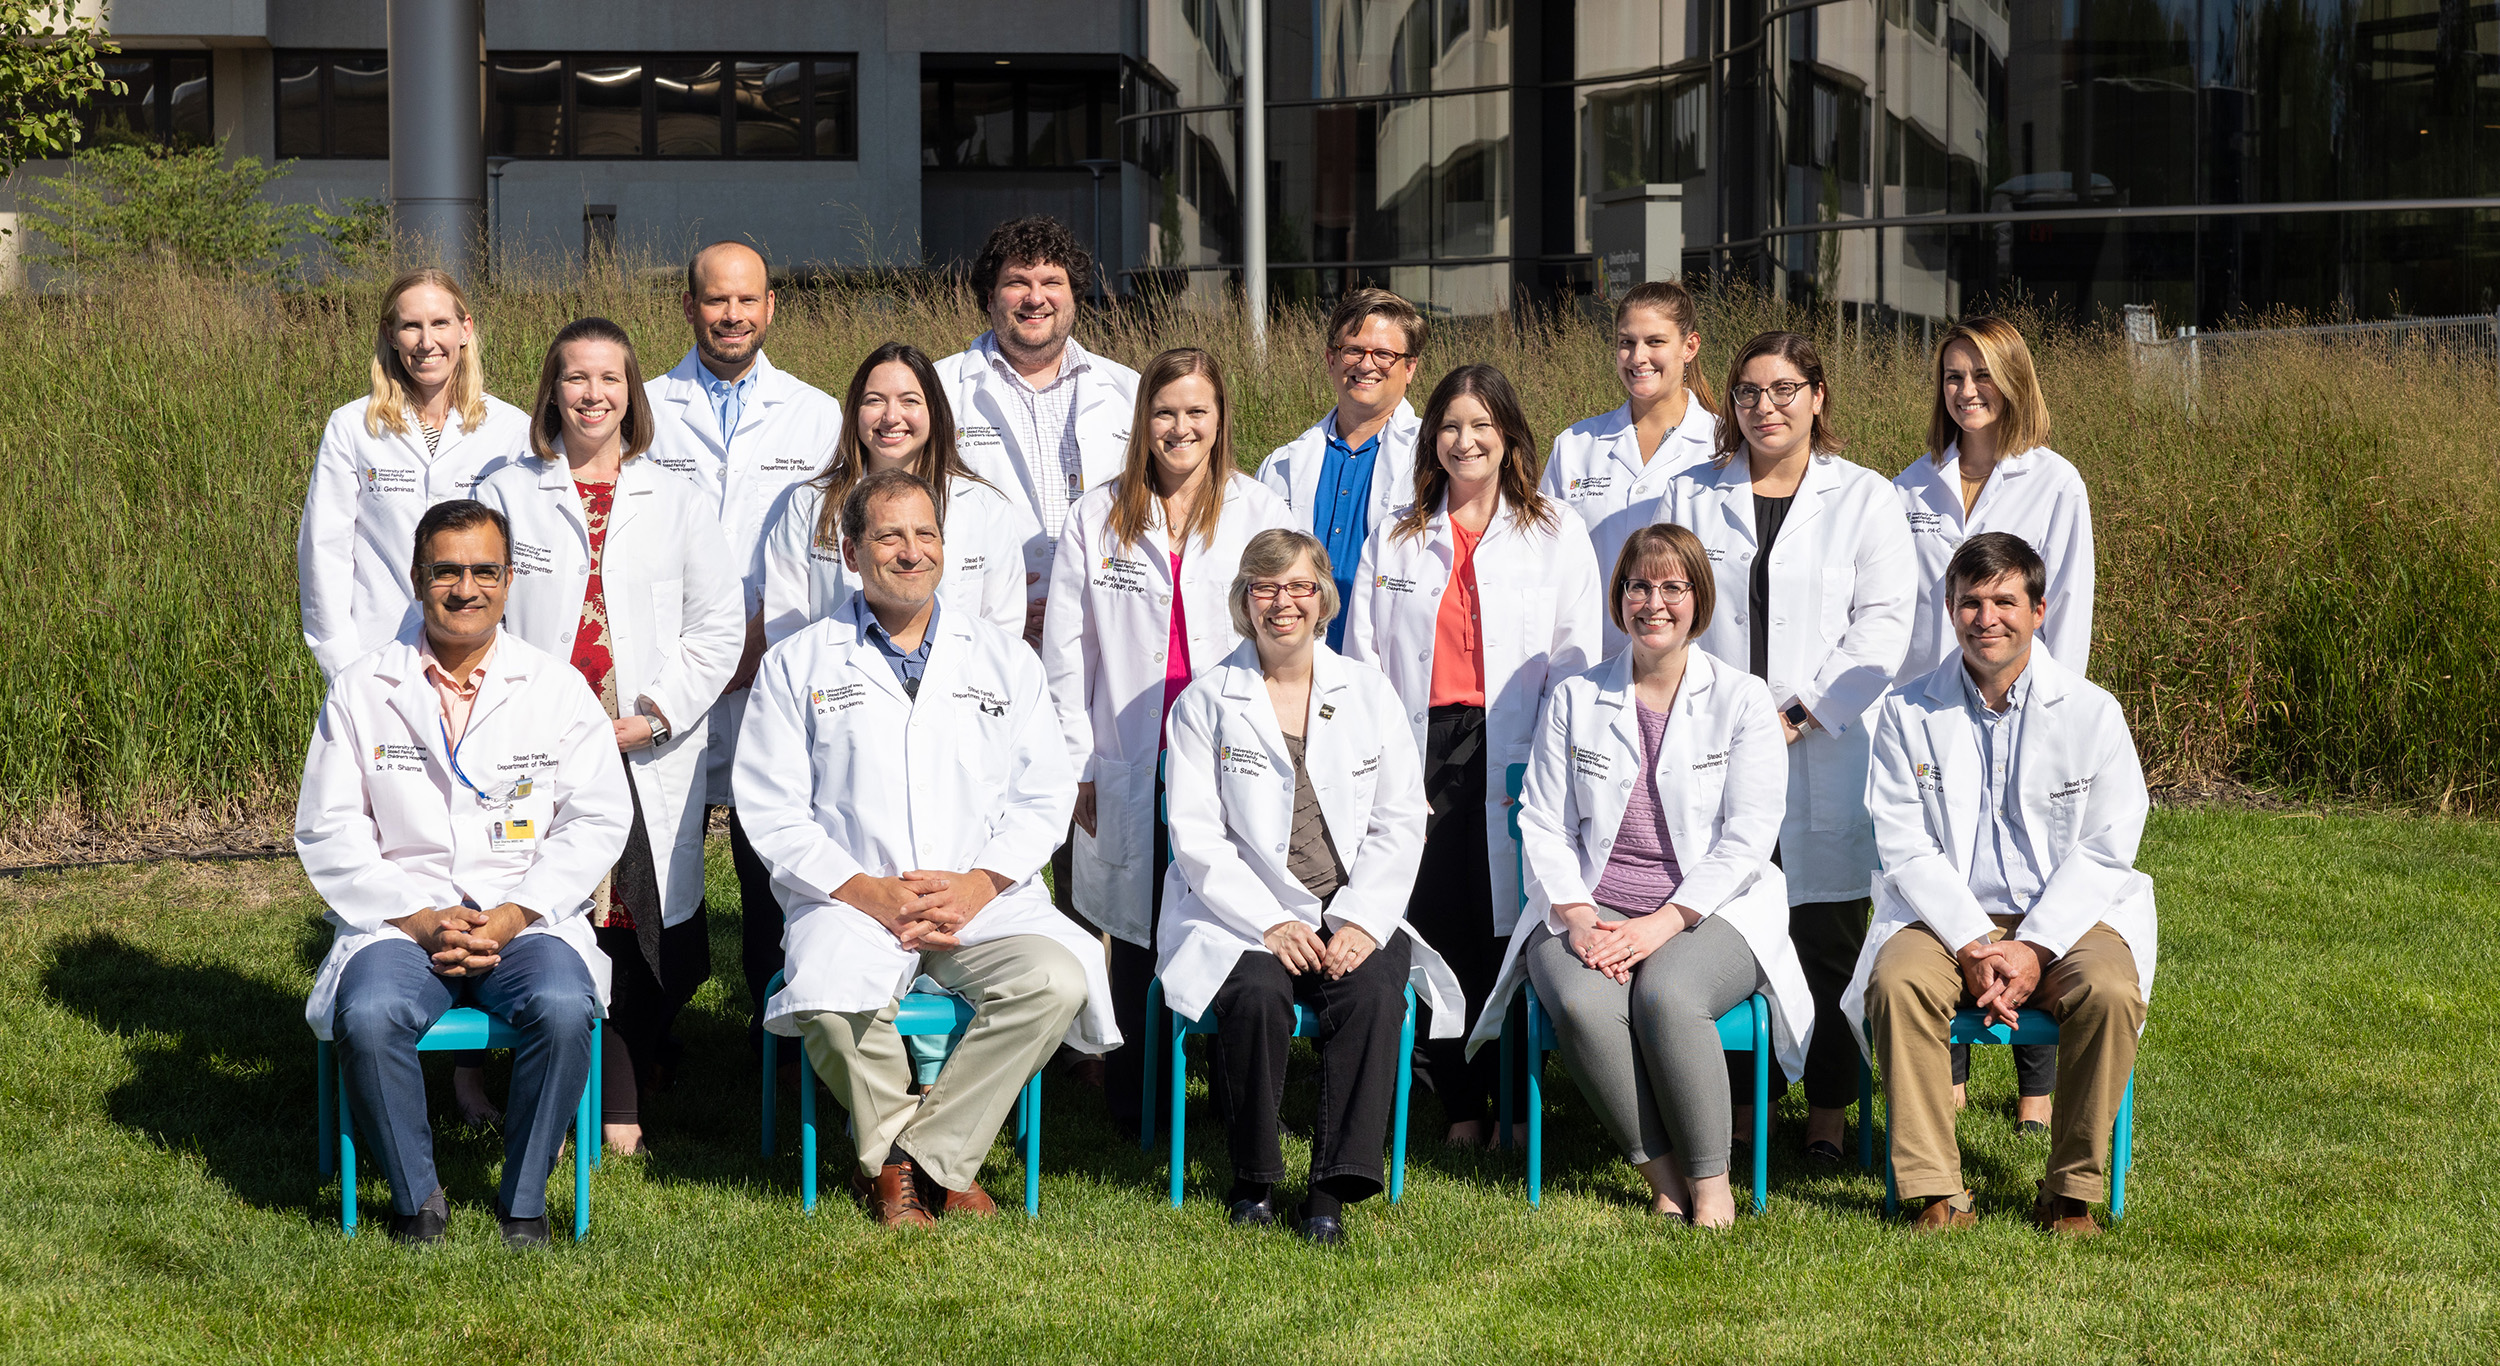 Pediatric Oncology faculty